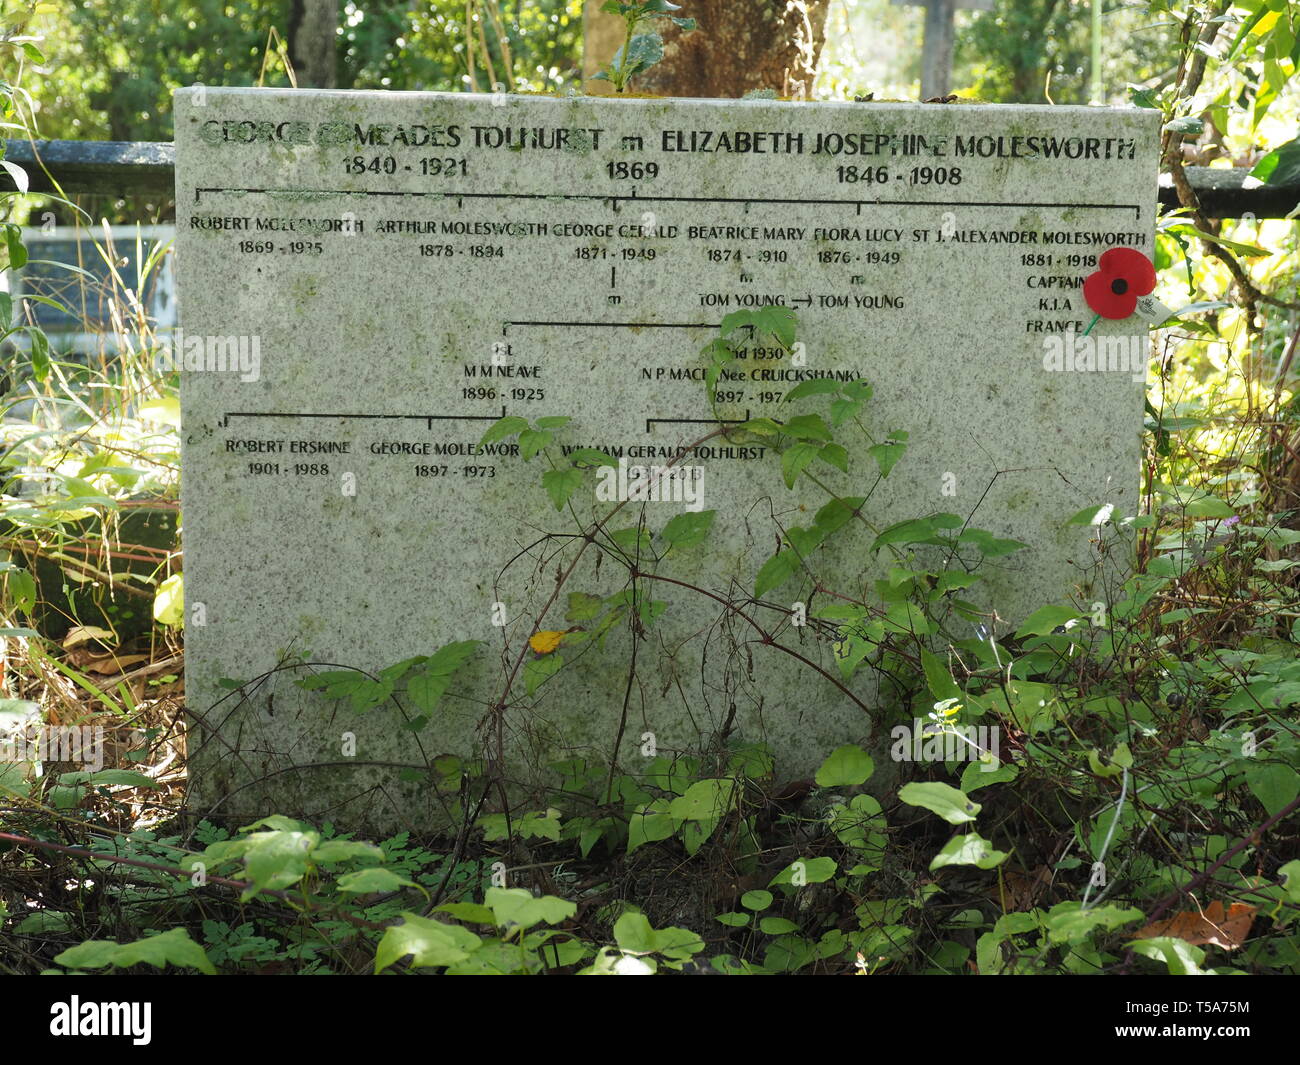 Unusual gravestone with a family tree diagram, in the huge and old Karori Cemetery, Wellington, NZ Stock Photo